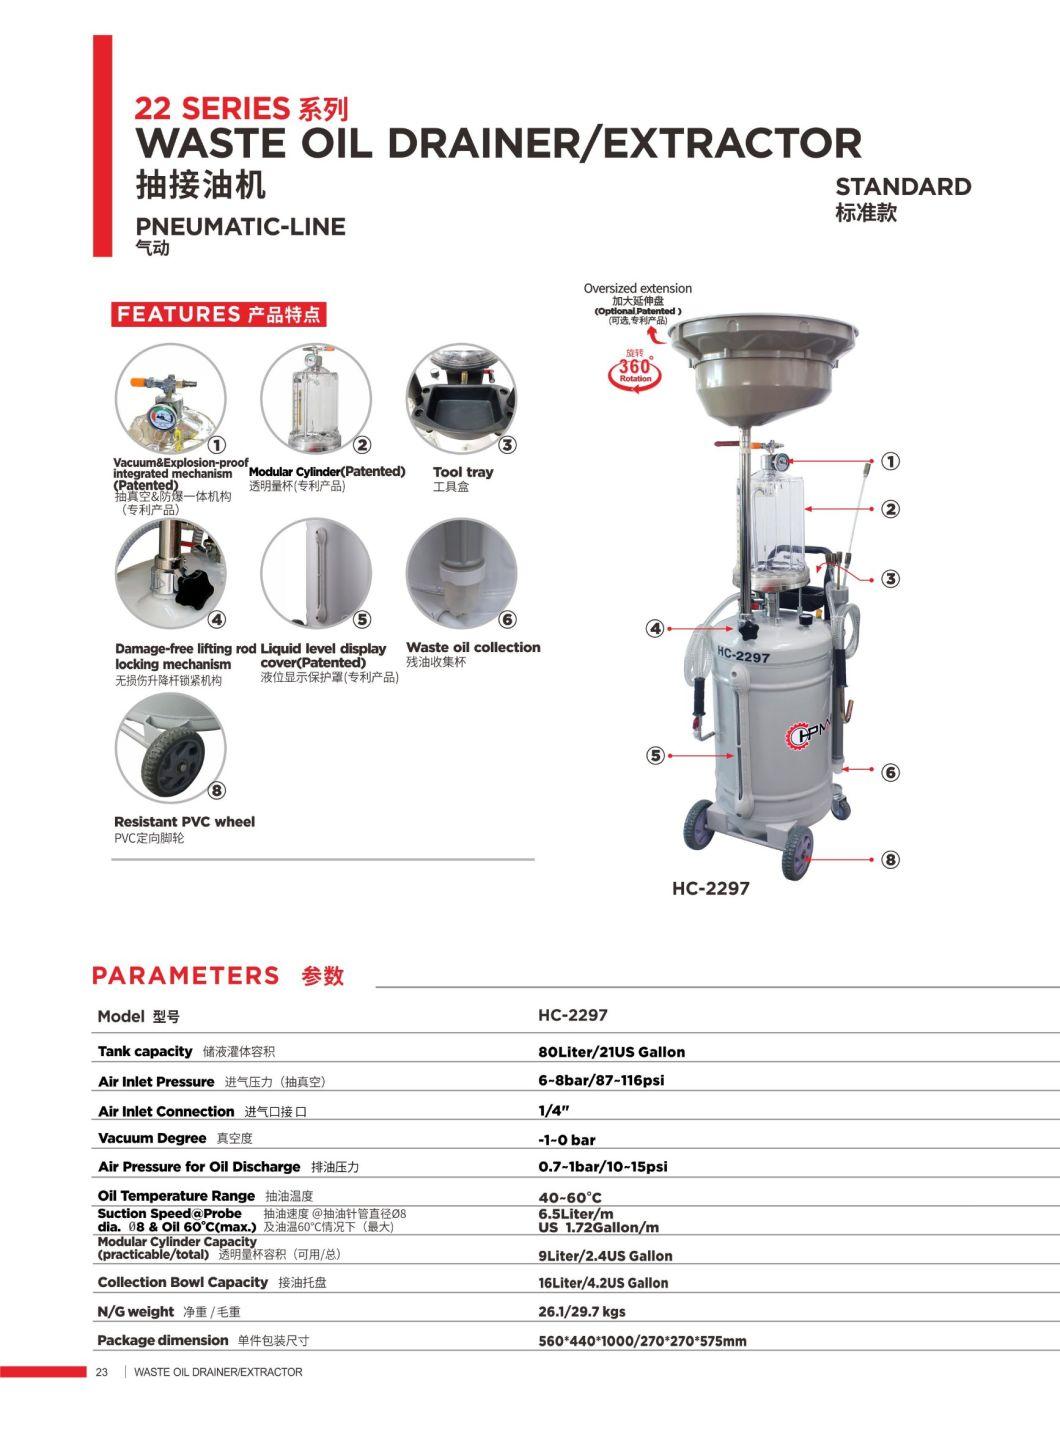 Top Sale Pneumatic Waste Oil Drainer Extractor with 360 Rotation Tank Hc-2297